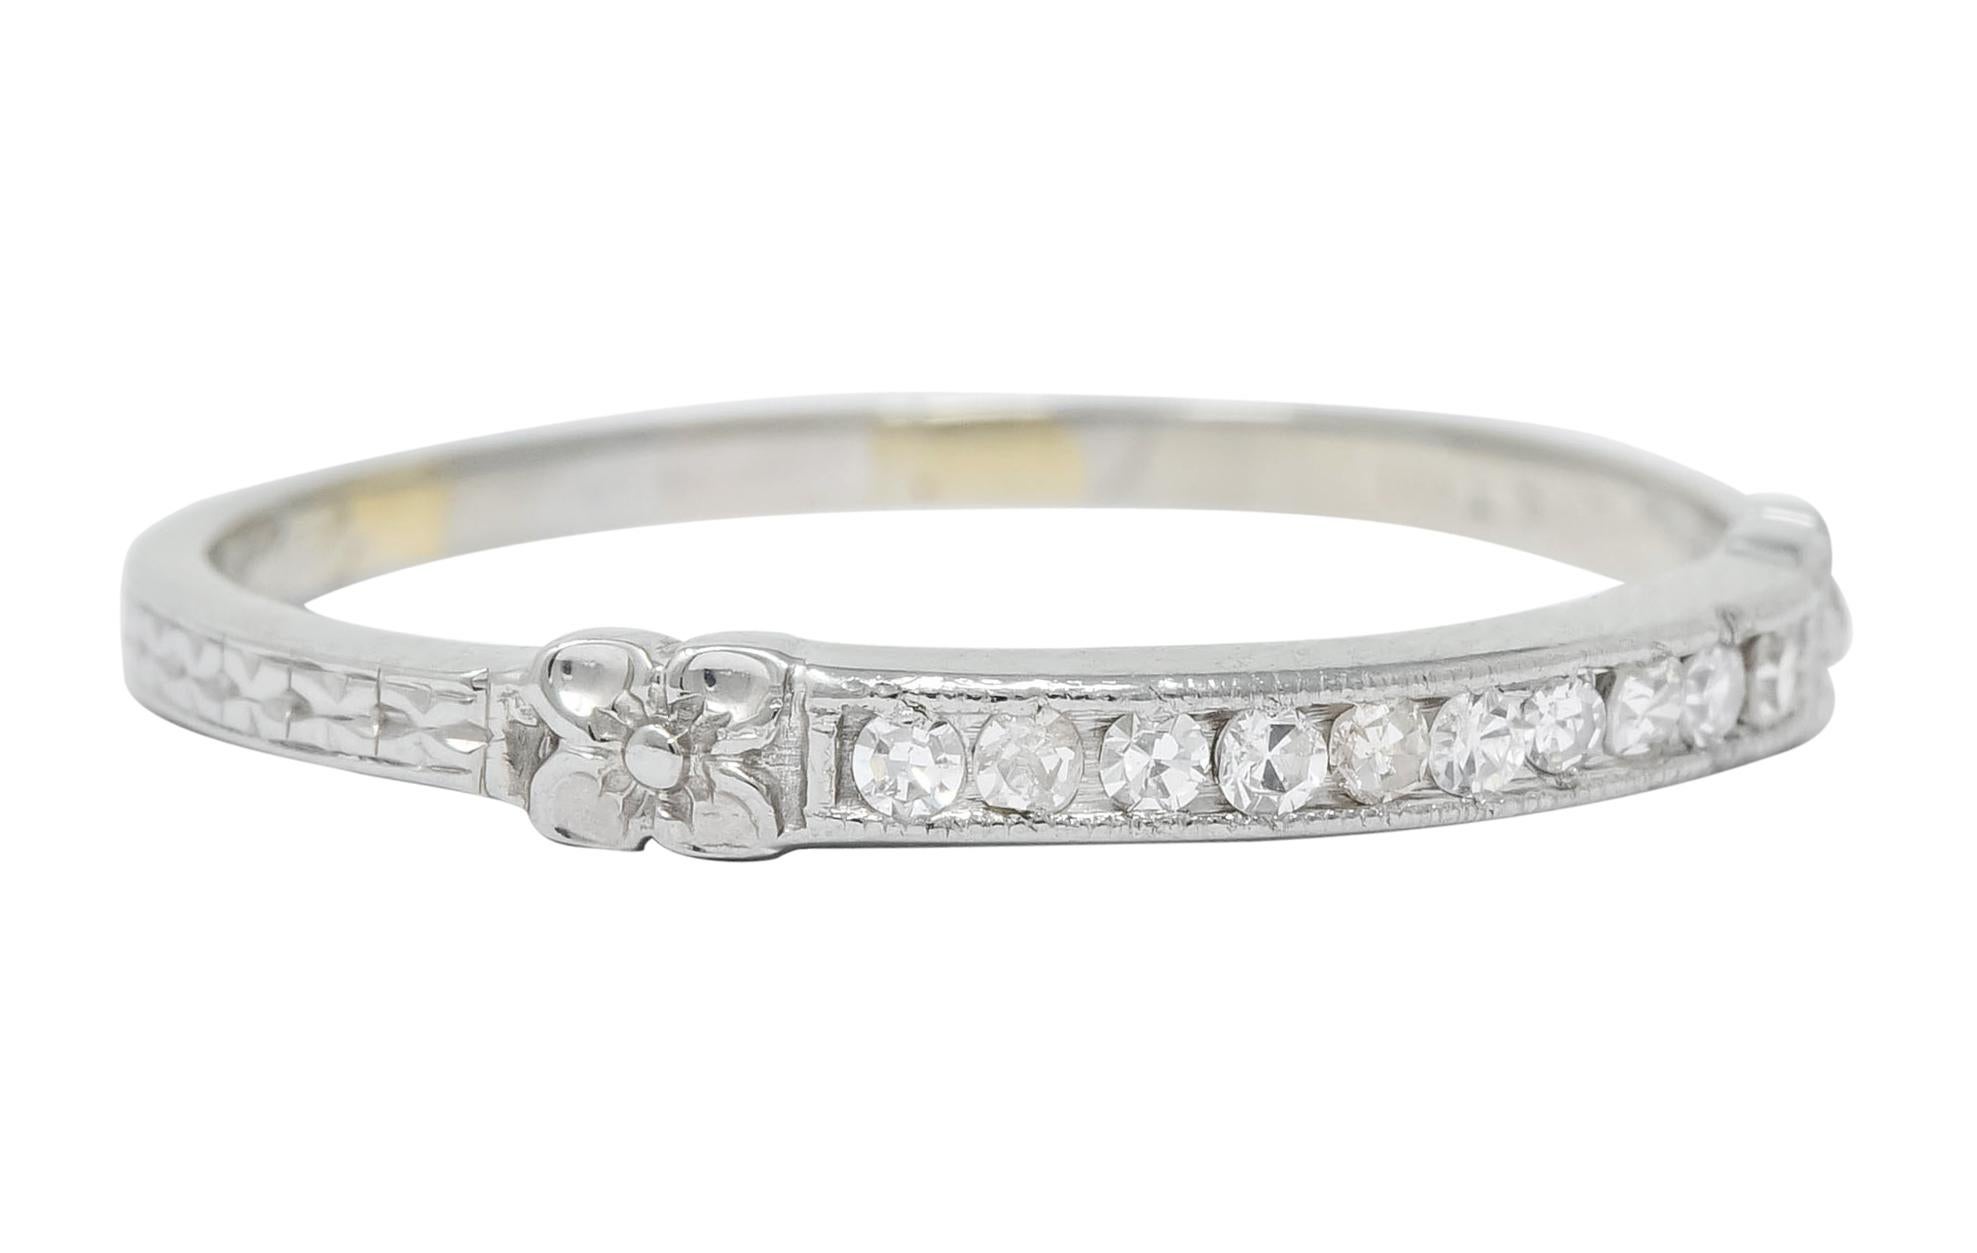 Centering ten single cut diamonds, set to front in a milgrain channel, weighing approximately 0.20 carat; eye-clean and white

Flanked by highly rendered orange blossoms accenting each end of channel

With deeply engraved shoulders depicting a